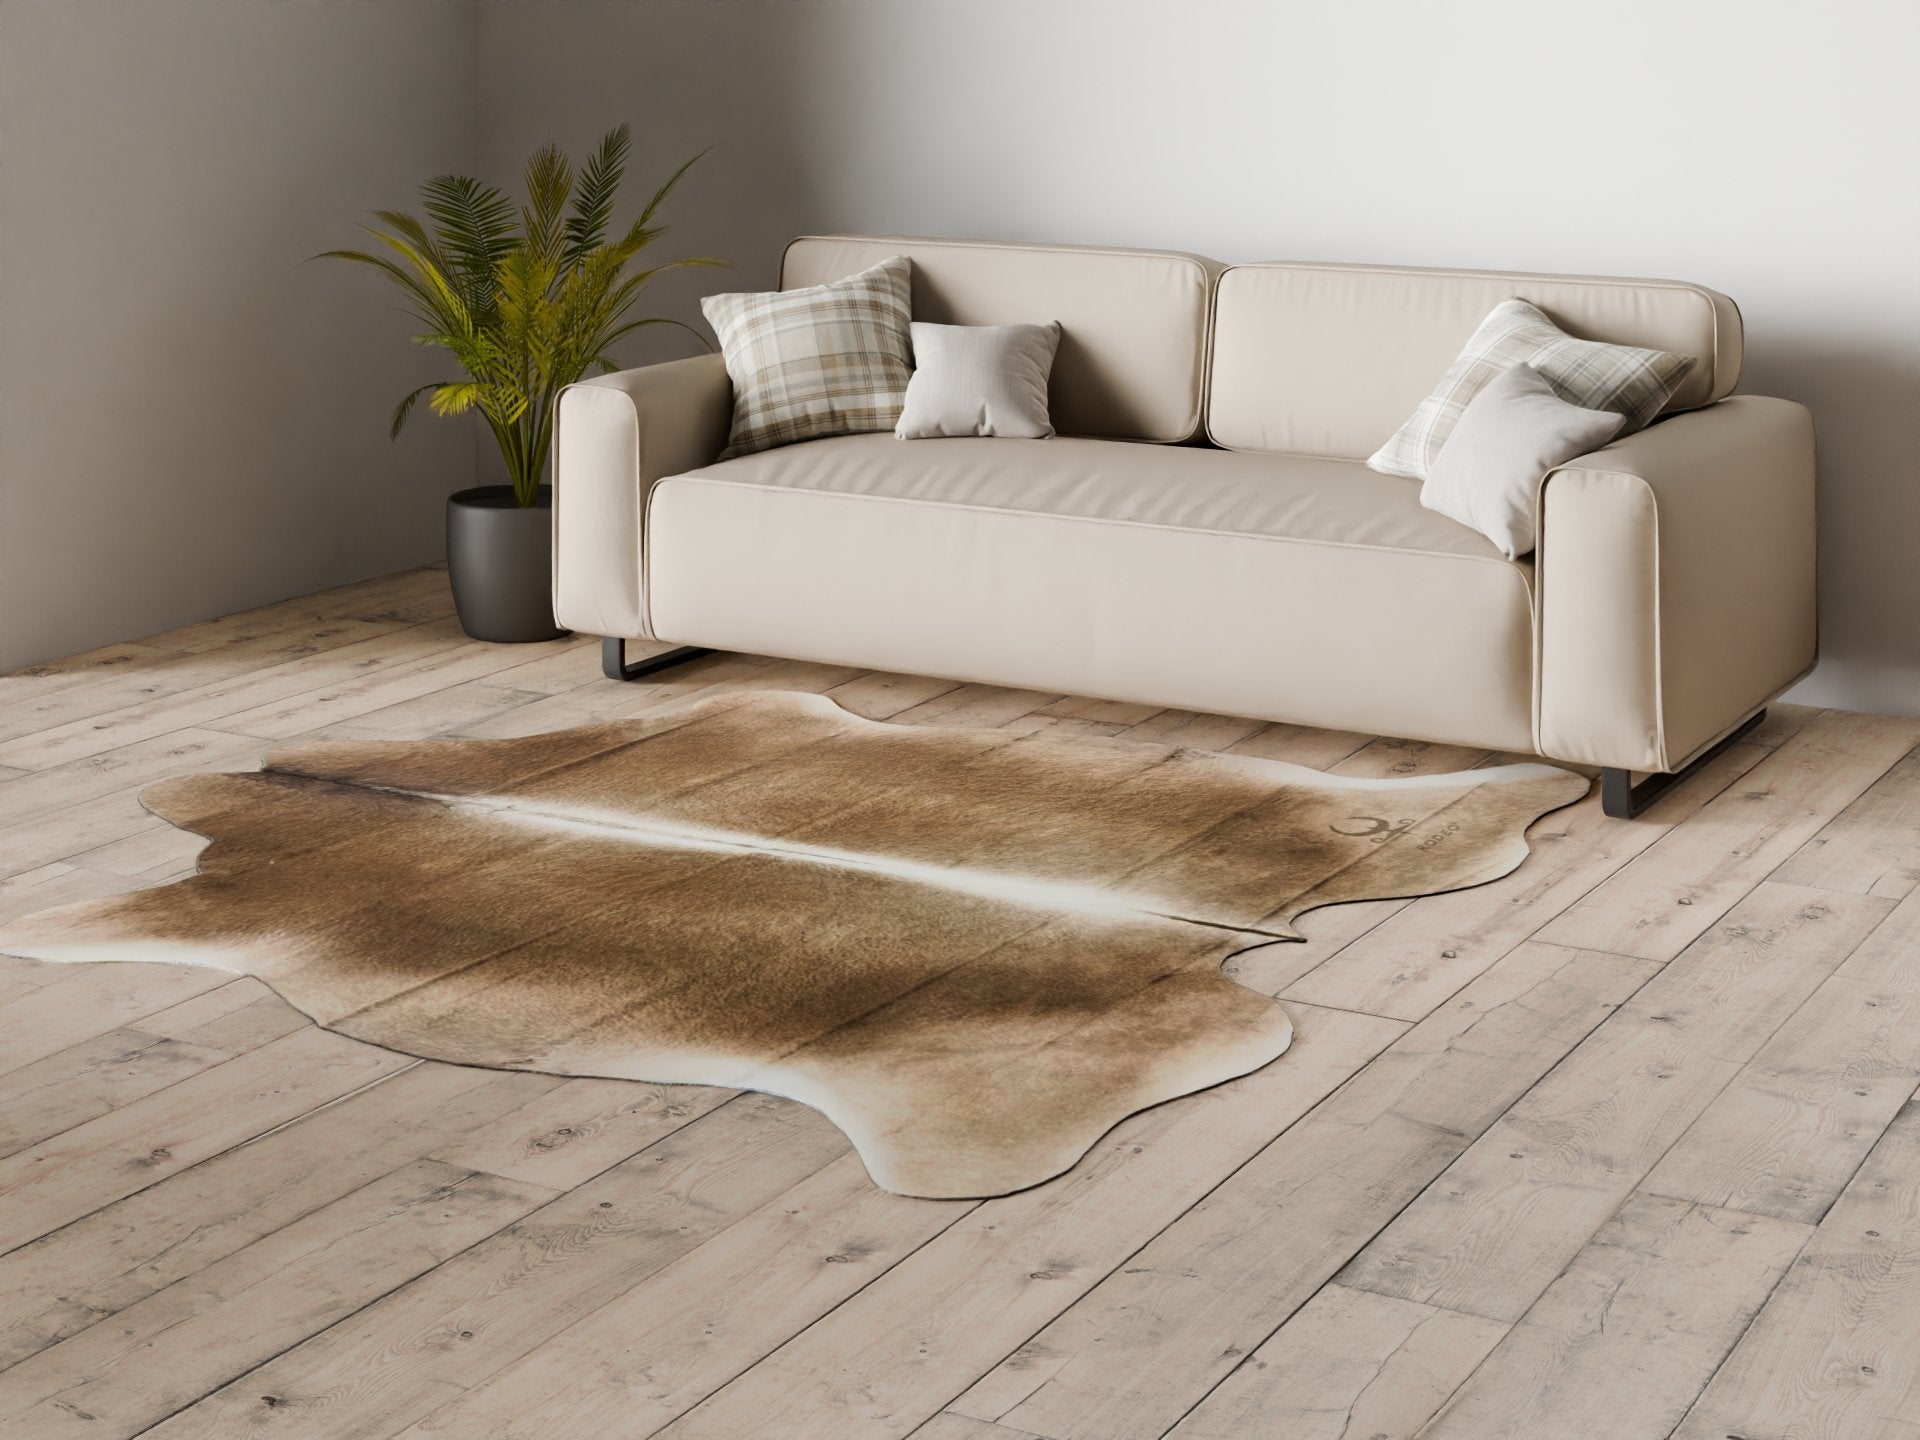 Extra Large Taupe Cowhide Rug - Rodeo Cowhide Rugs